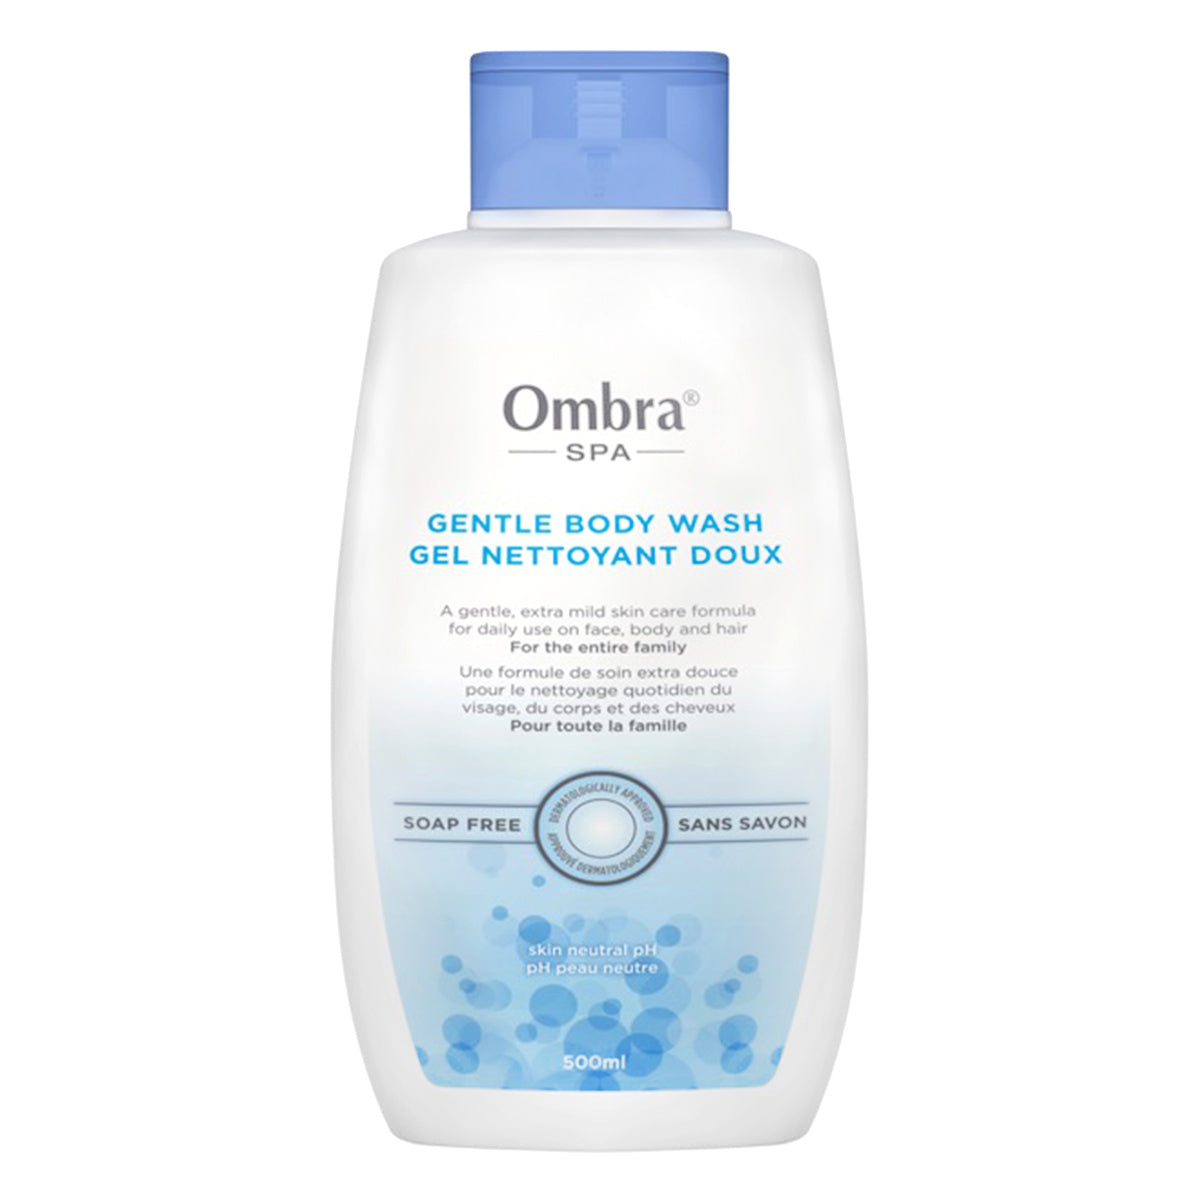 Primary image of Gentle Body Wash